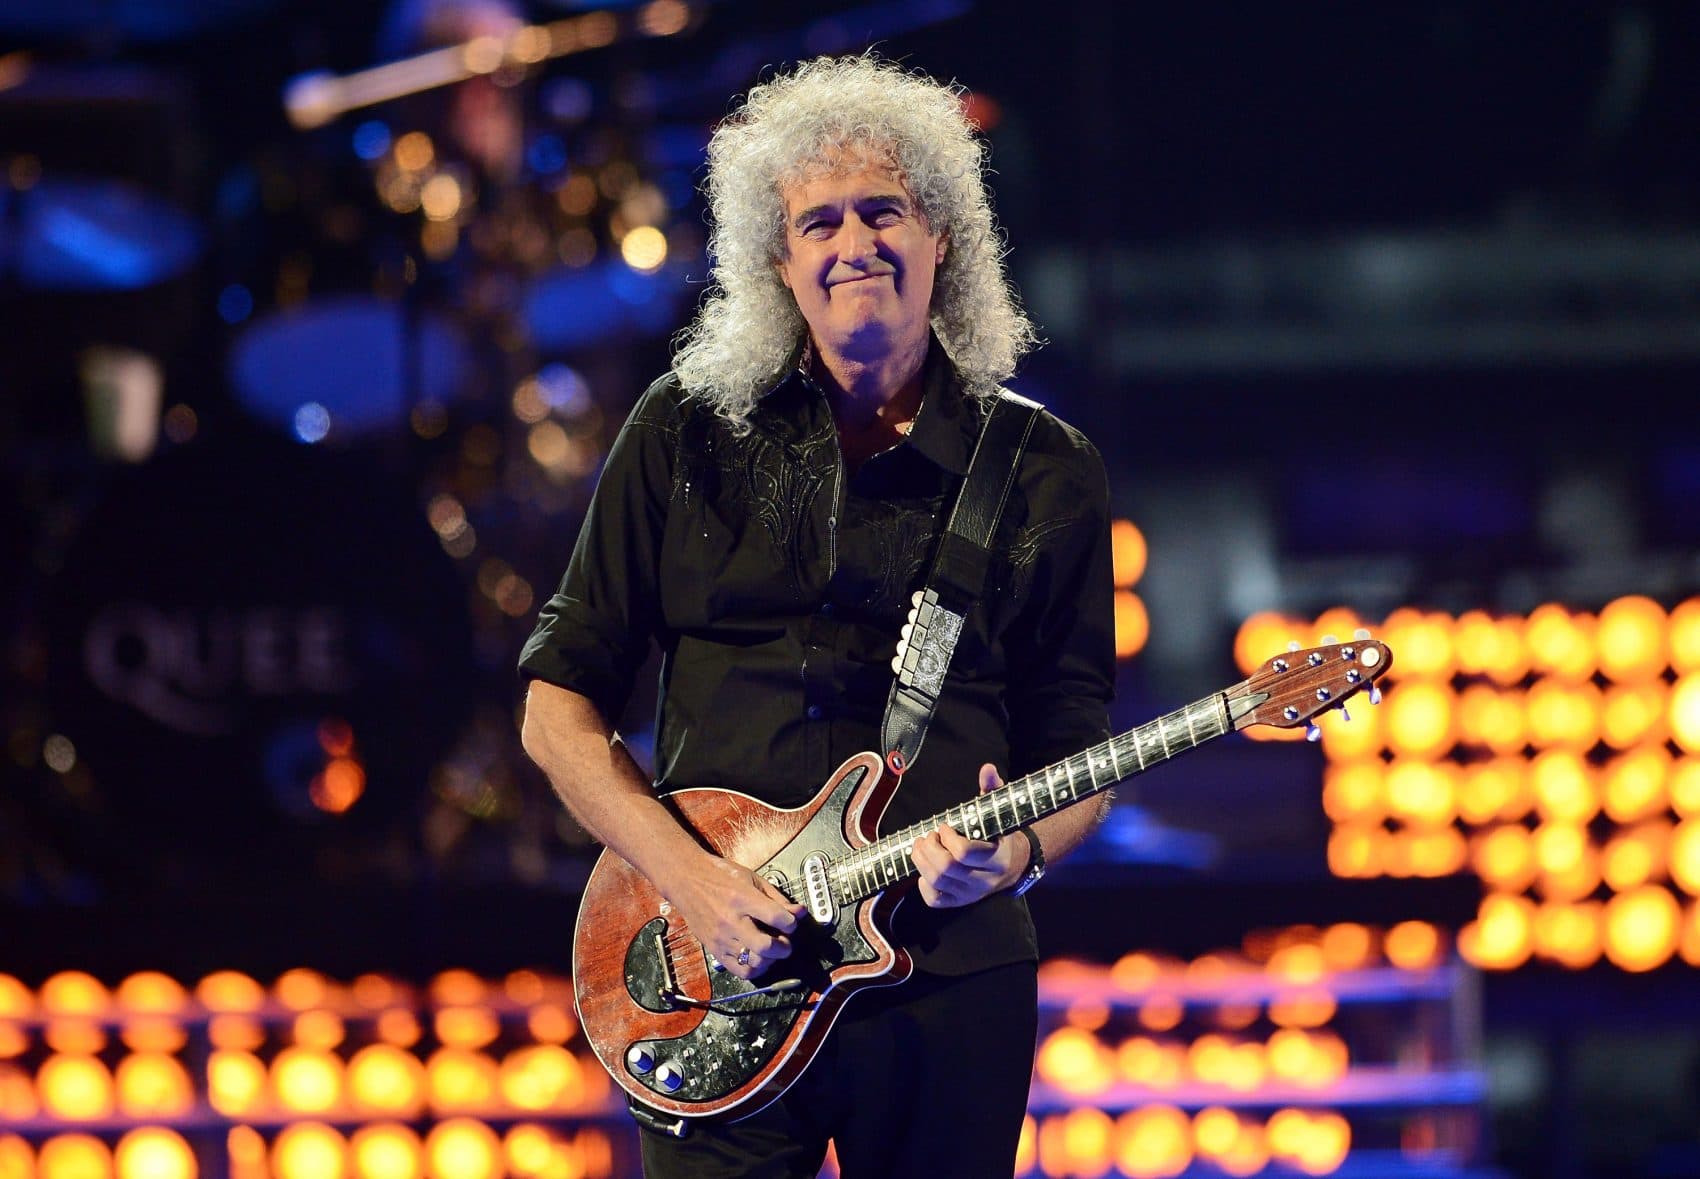 Guitarist Brian May of Queen, pictured here performing in 2013. (Ethan Miller/Getty Images for Clear Channel)